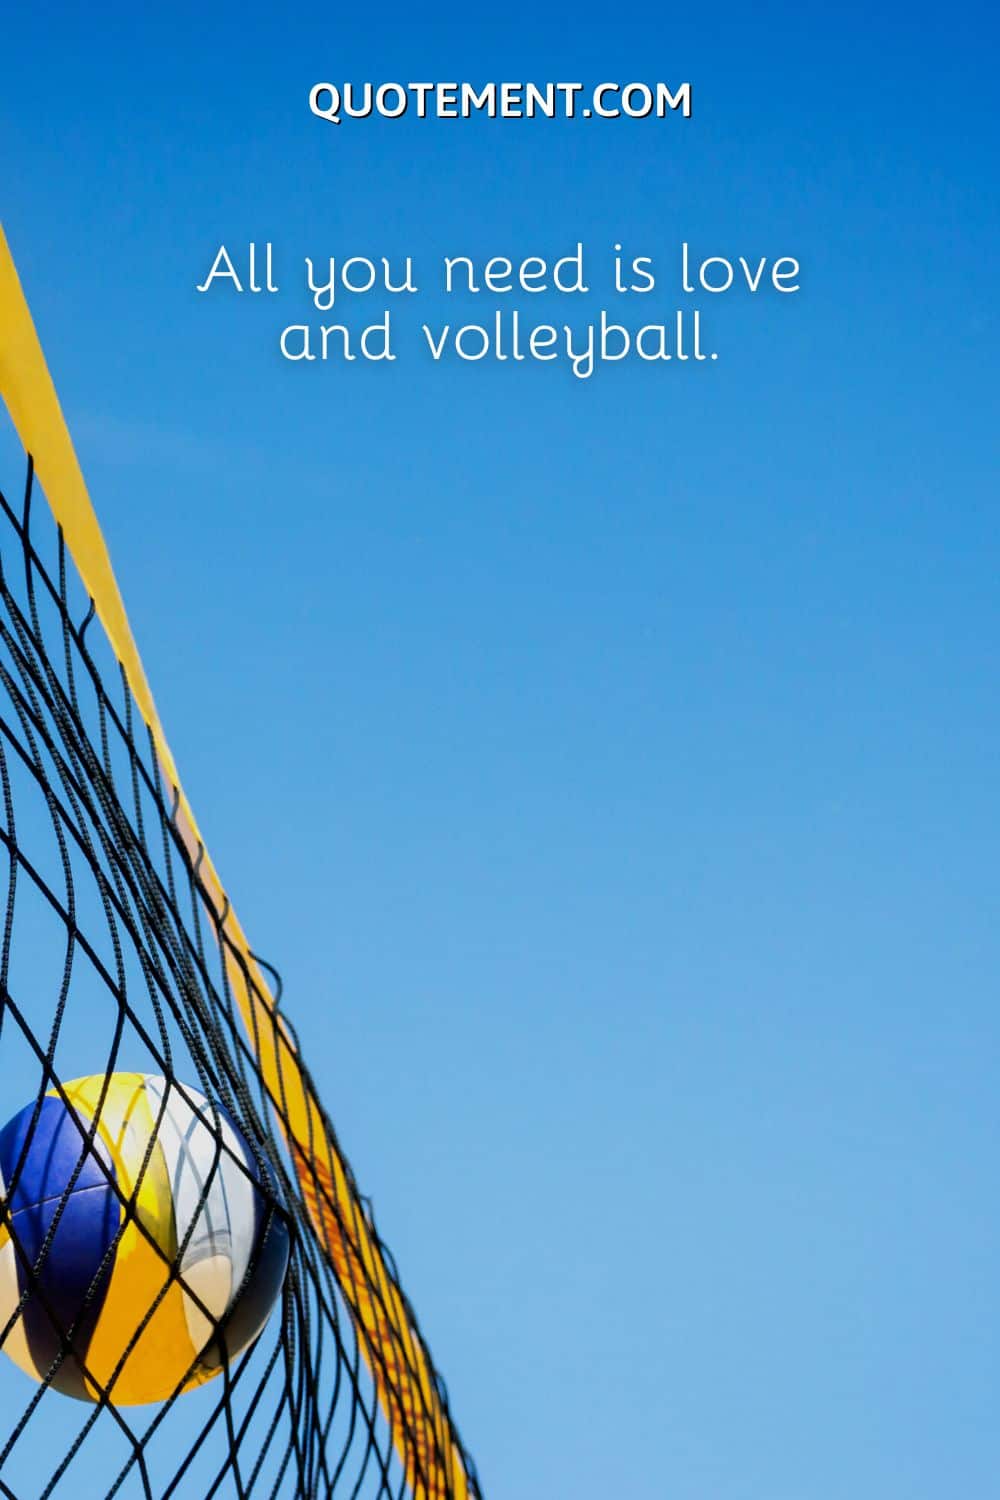 All you need is love and volleyball.